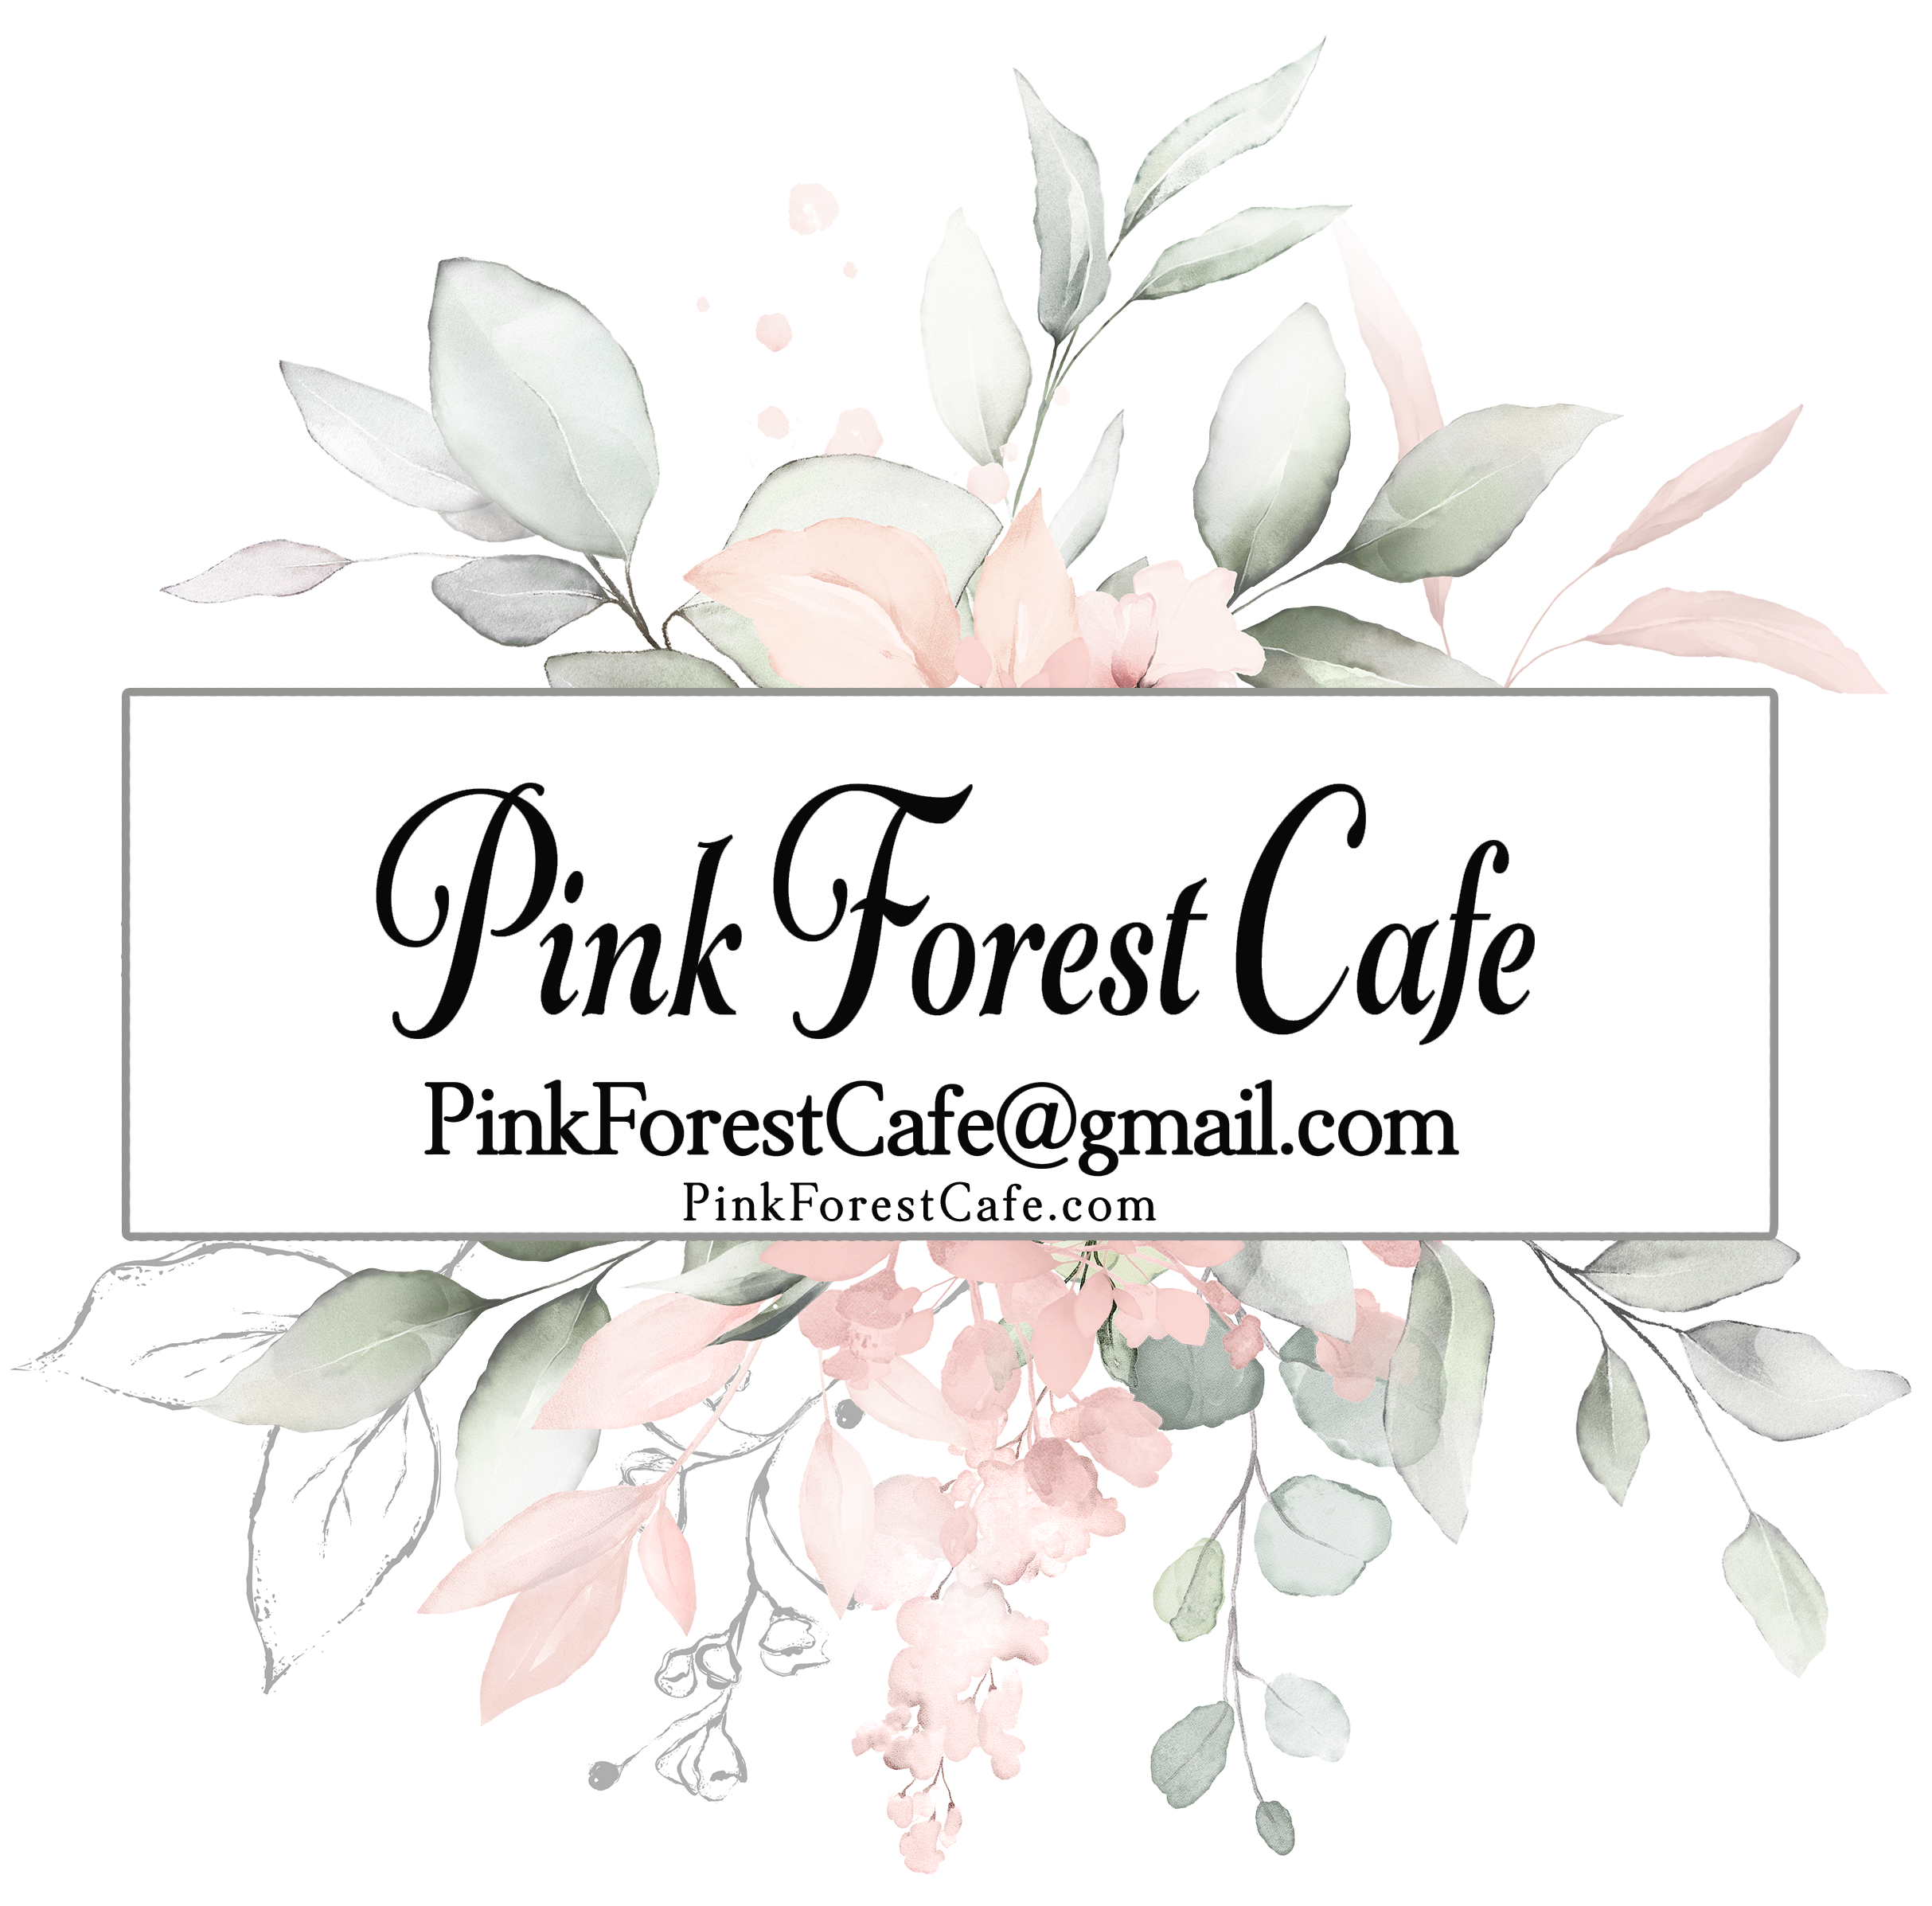 Order My Print - Pink Forest Cafe - 11 (Eleven) Prints - 11 Designs Printed and Shipped